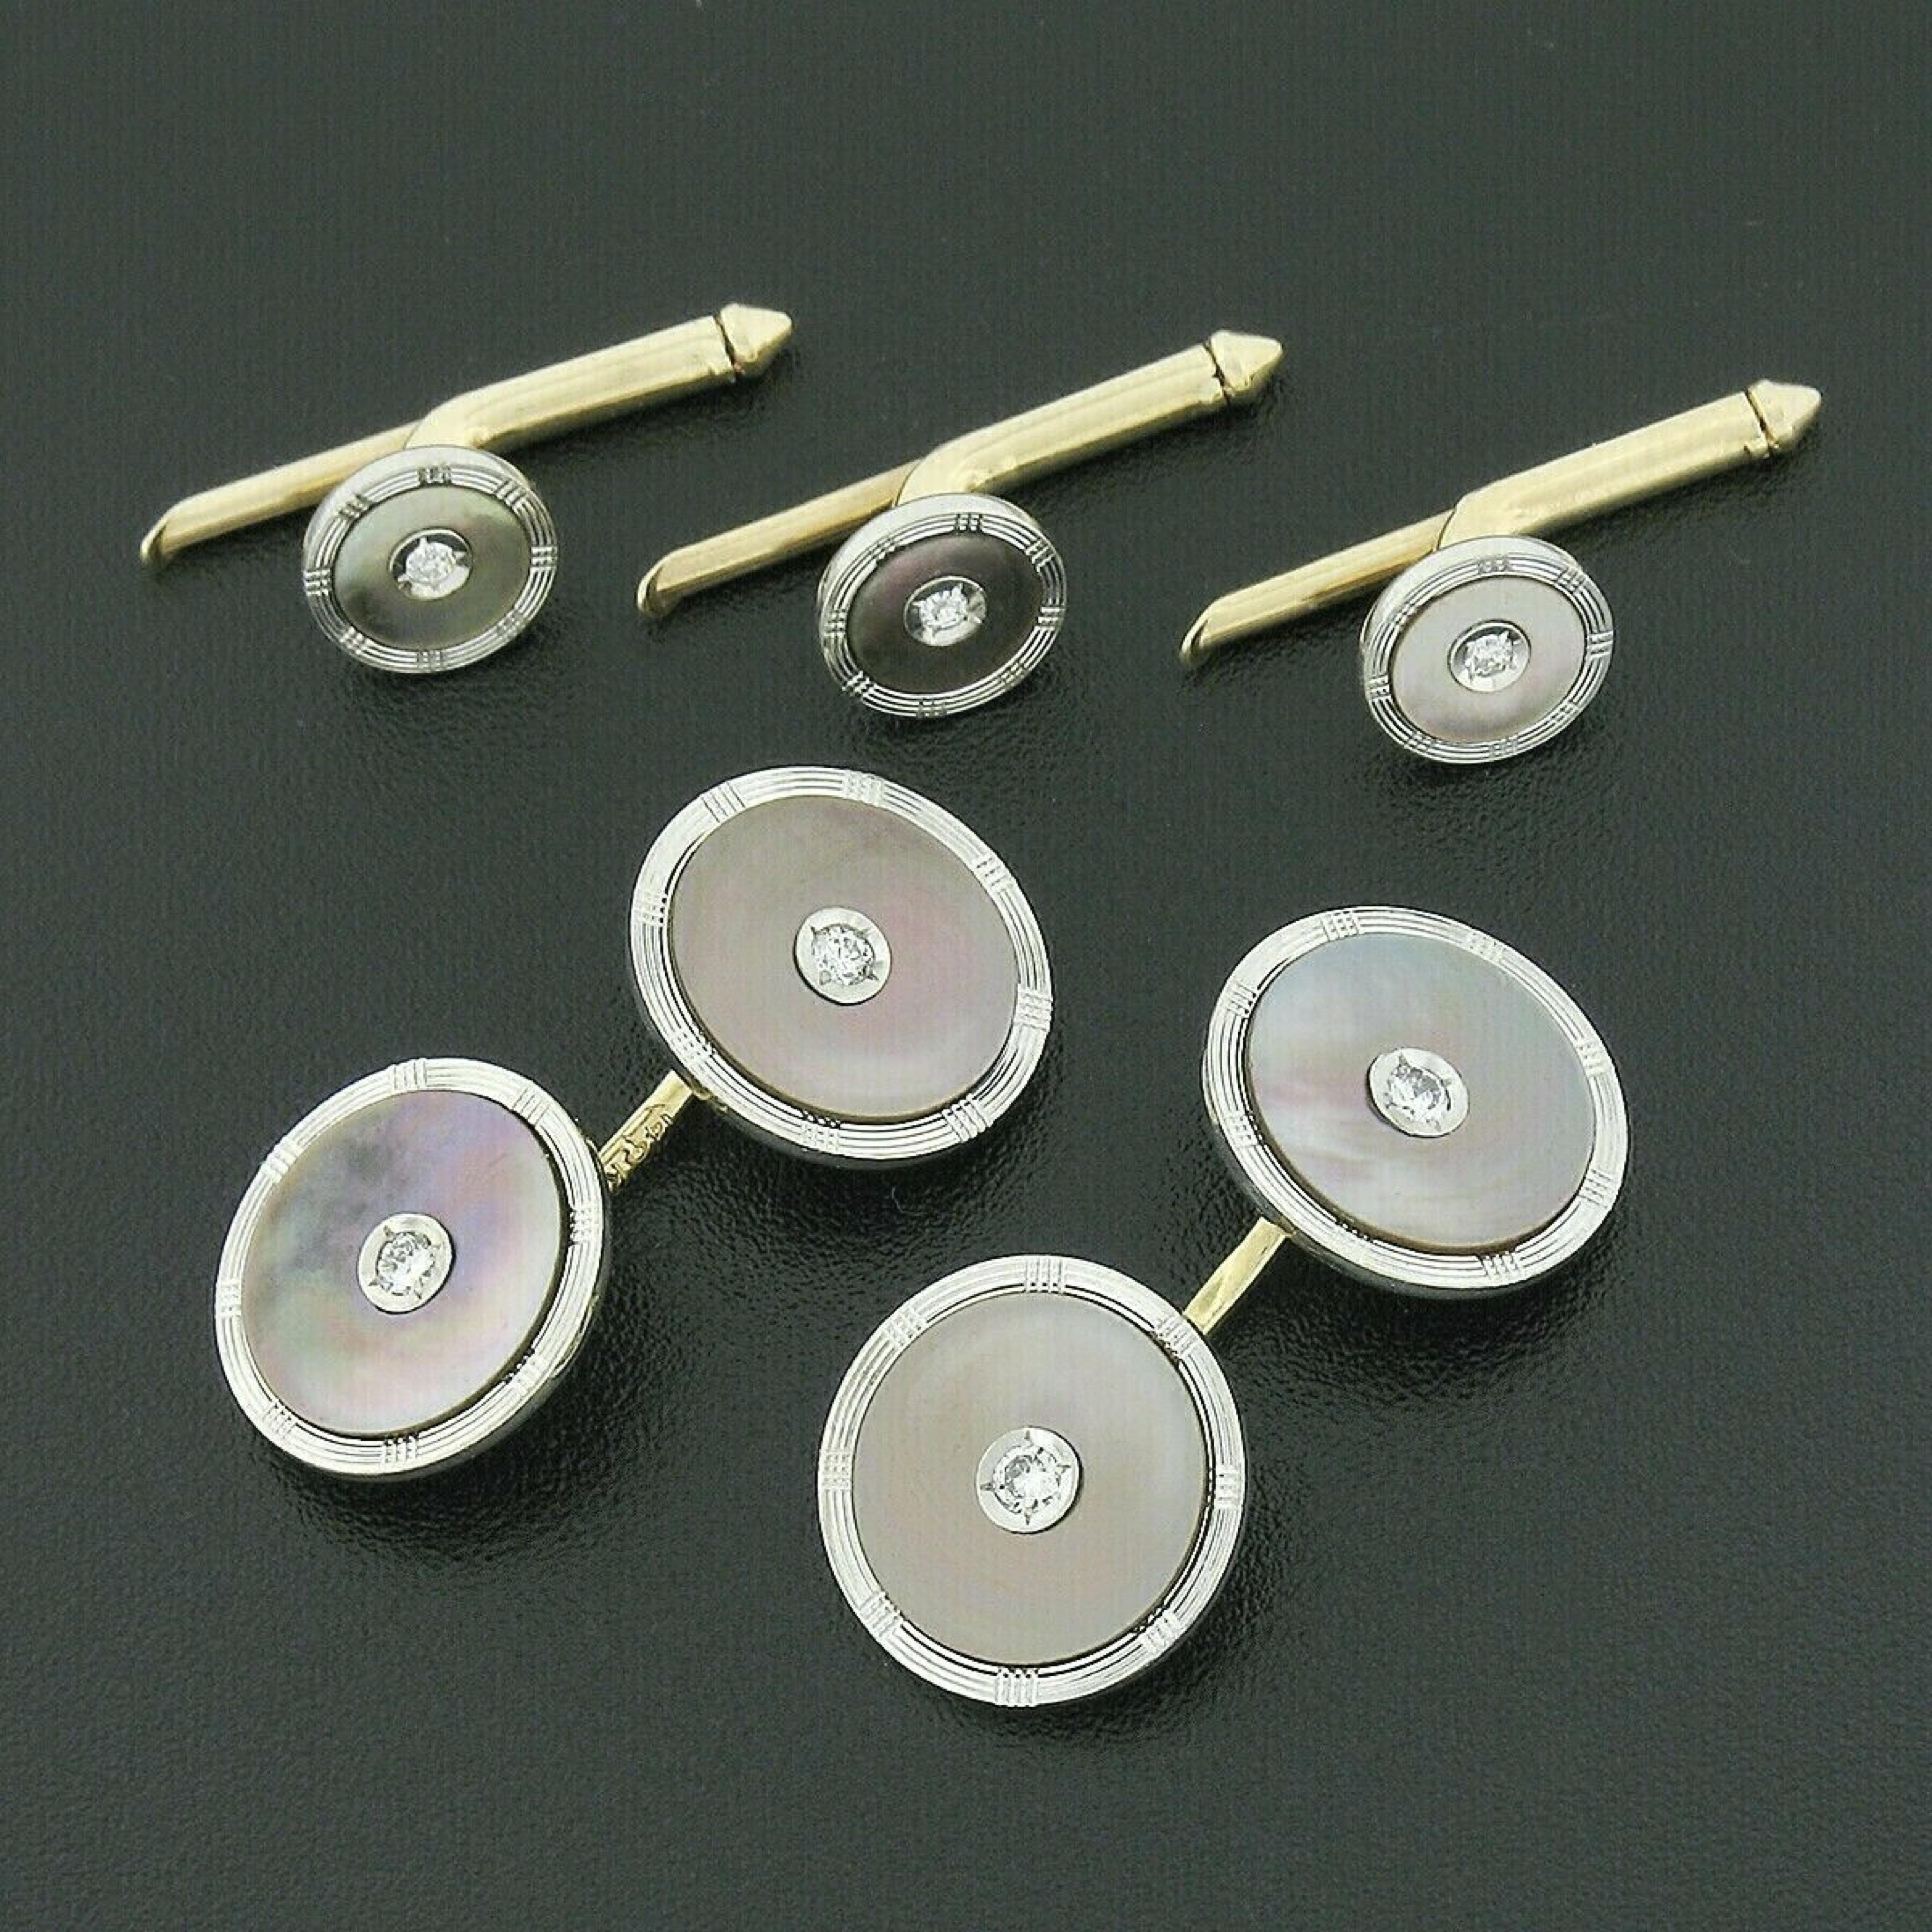 Here we have an antique set of men's cuff links and button studs that was crafted from solid 14k yellow gold with a white gold top during the art deco period. The set features a round shape with an old European cut diamond neatly set at their center